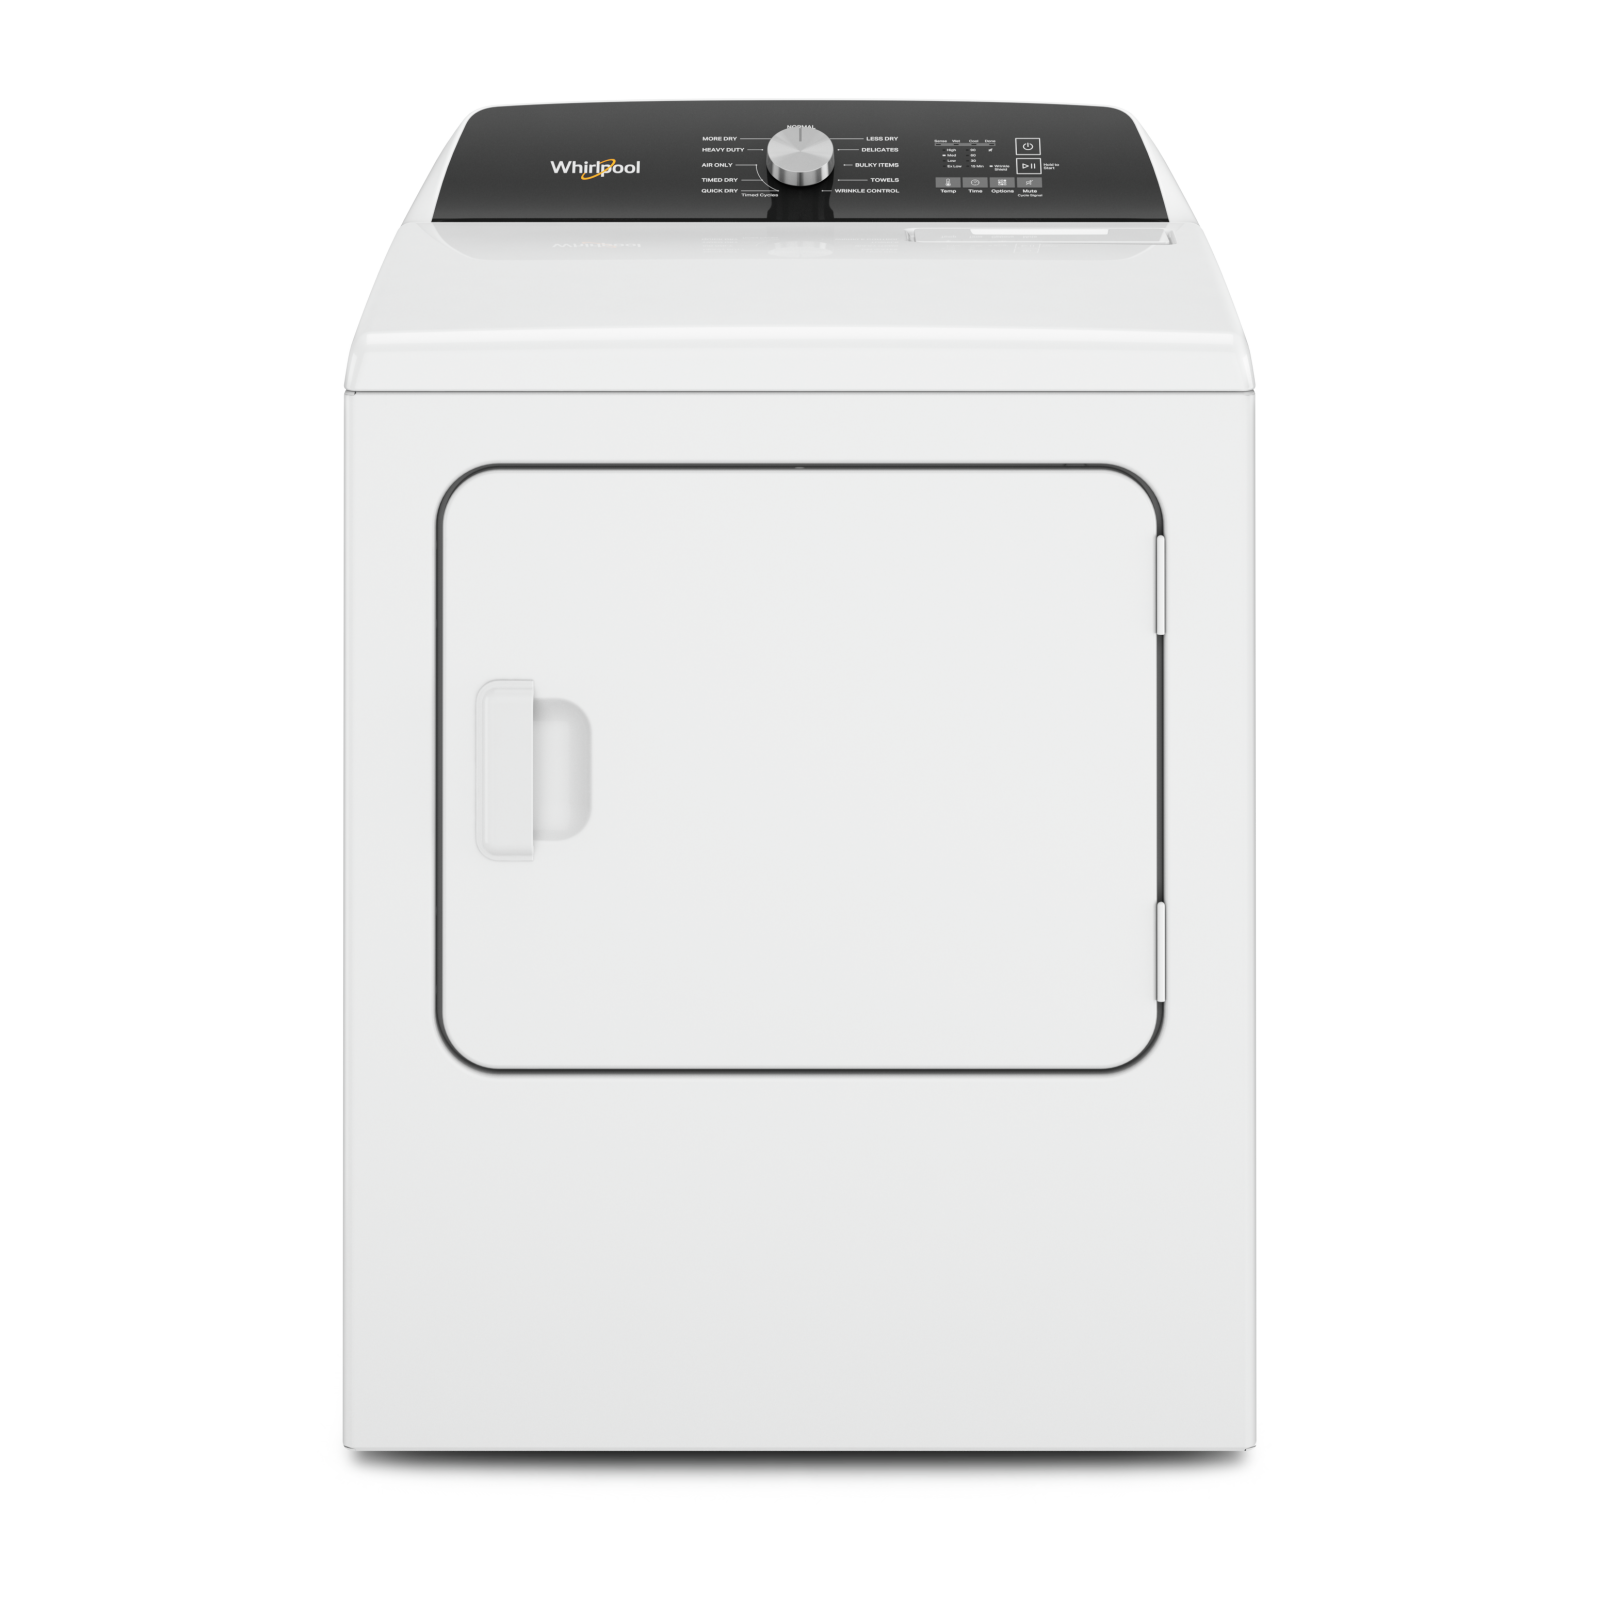 Whirlpool - 7 cu. Ft  Electric Dryer in White - YWED5010LW